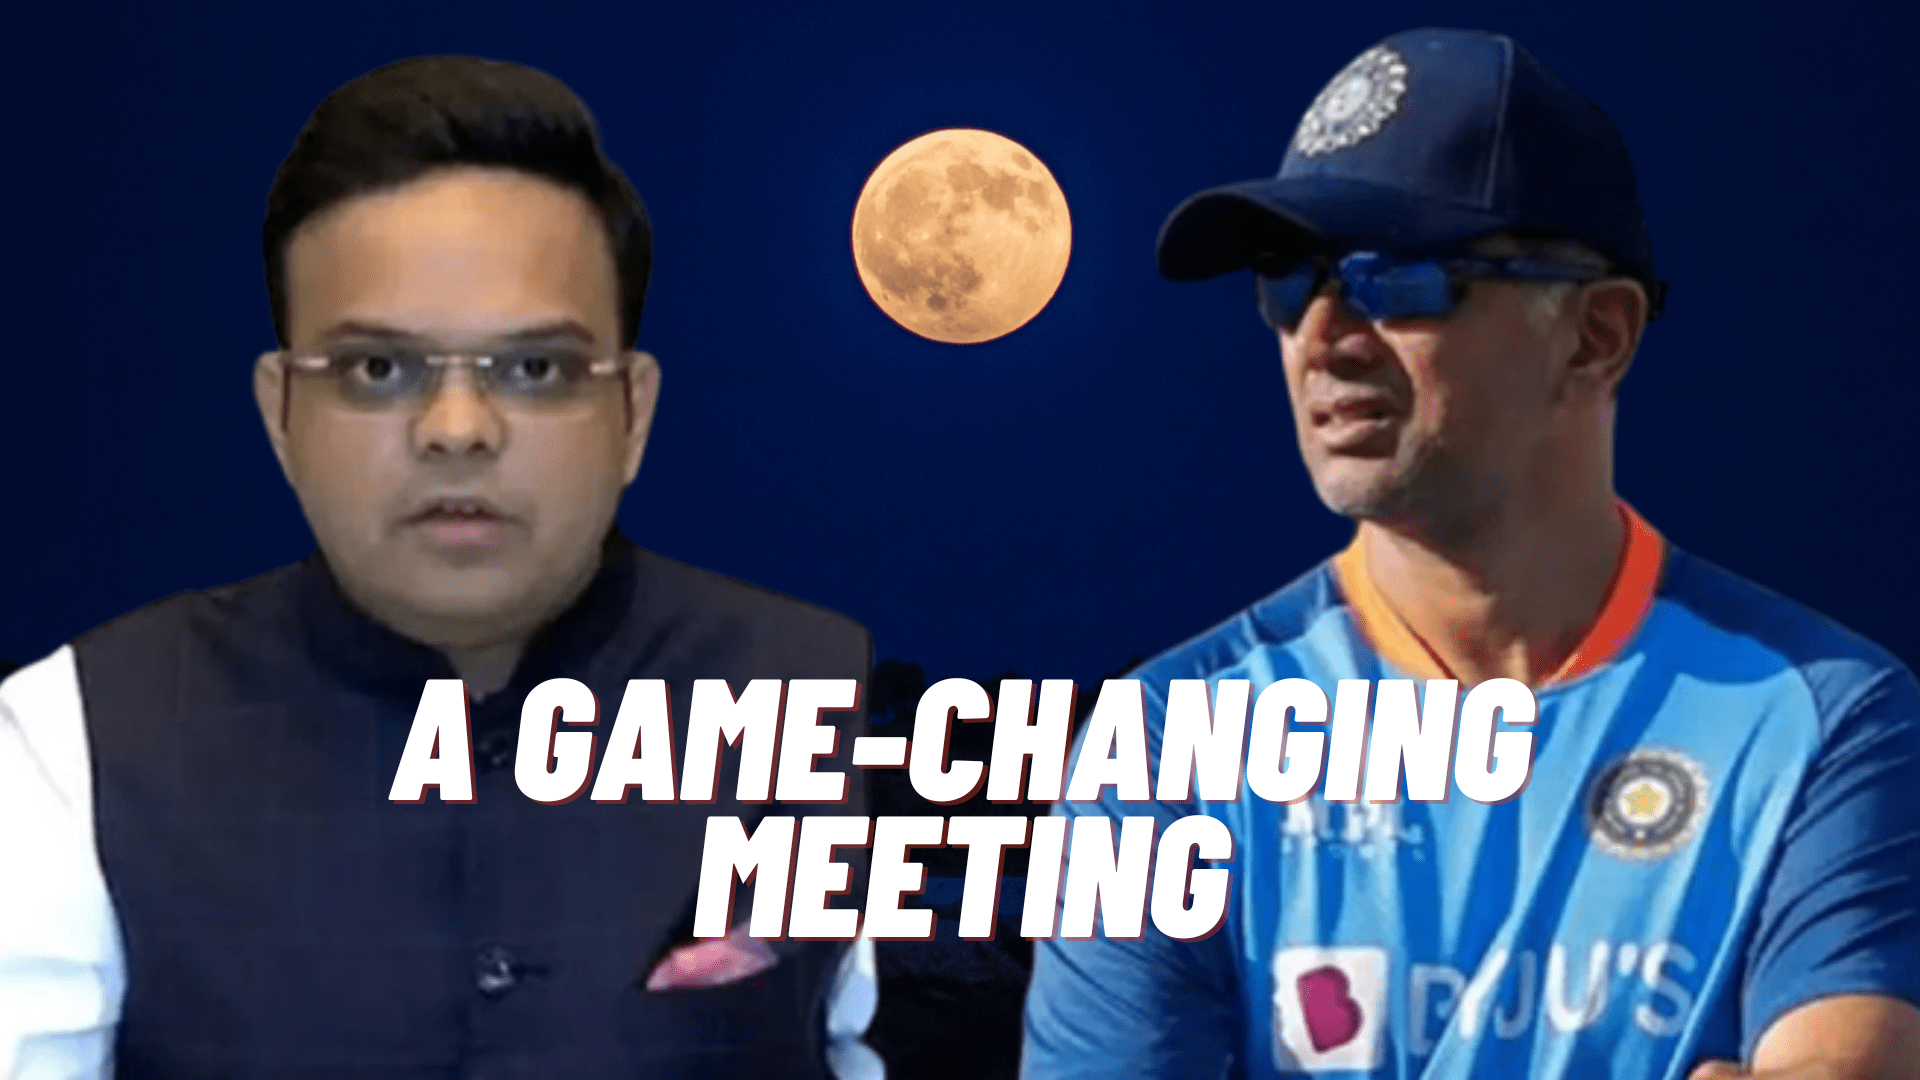 A Game-Changing Meeting